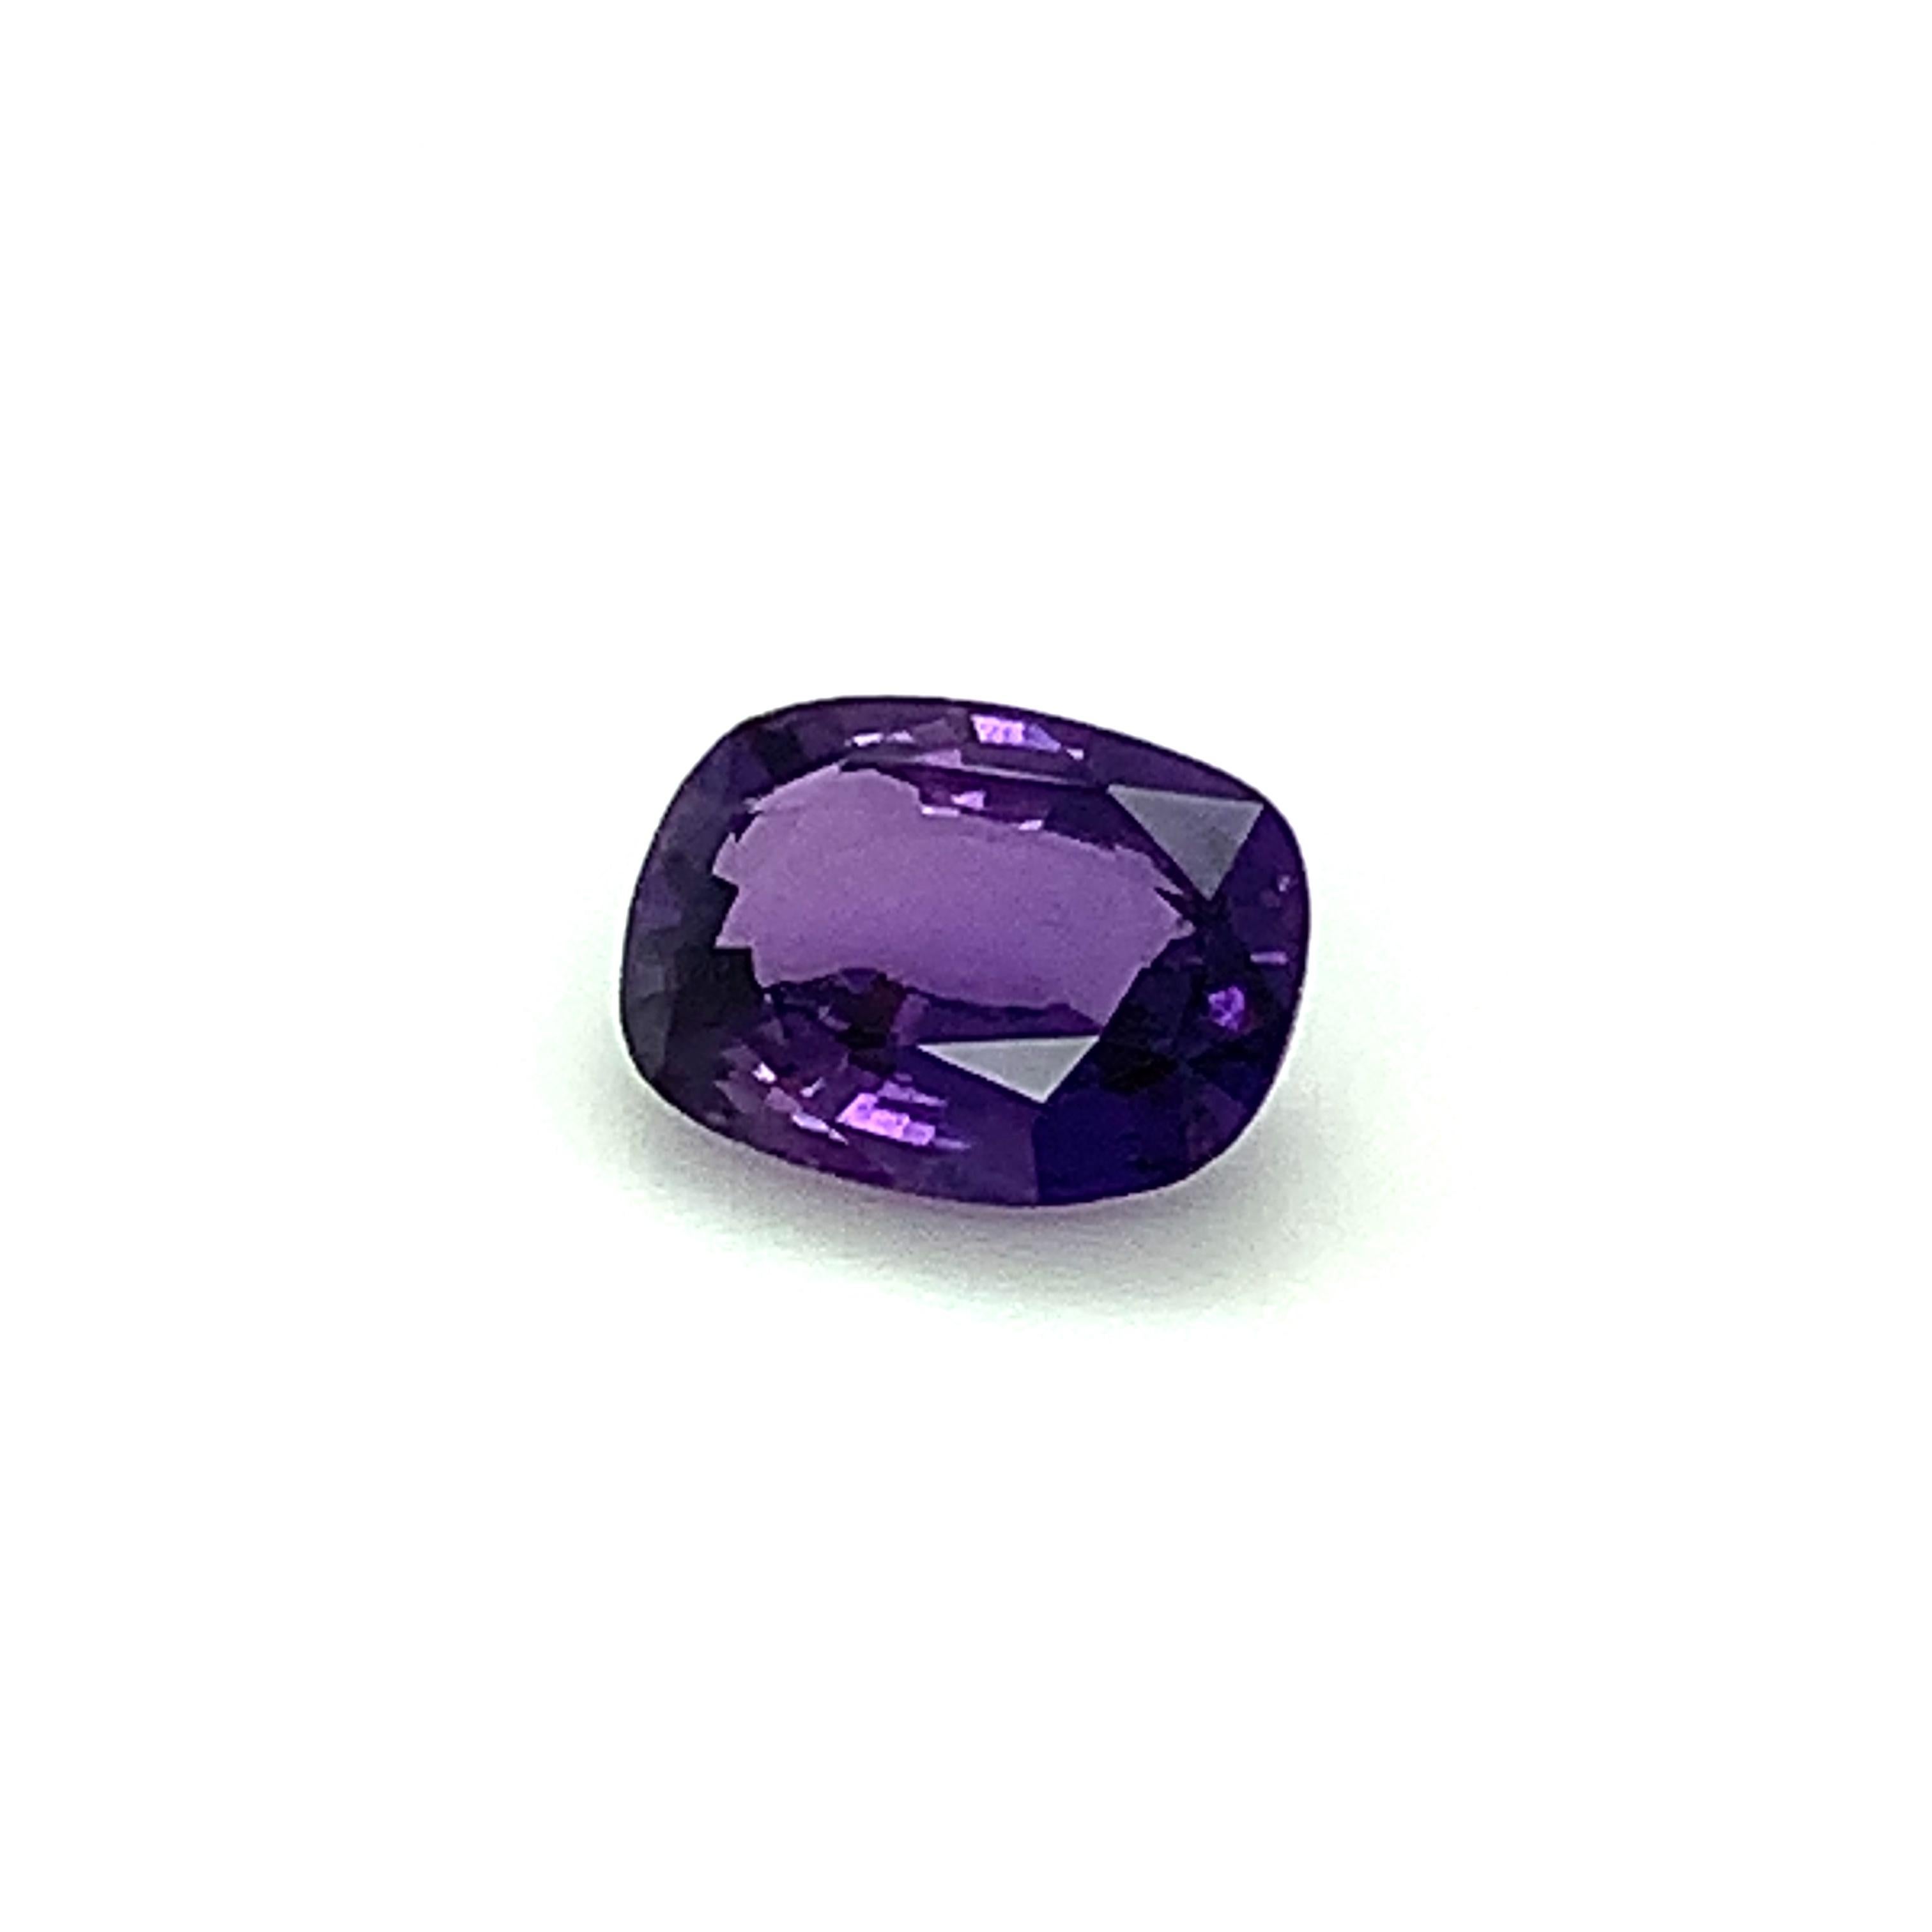 Unheated 3.50 Carat Color Change Sapphire, Unset Loose Gemstone, GIA Certified For Sale 5